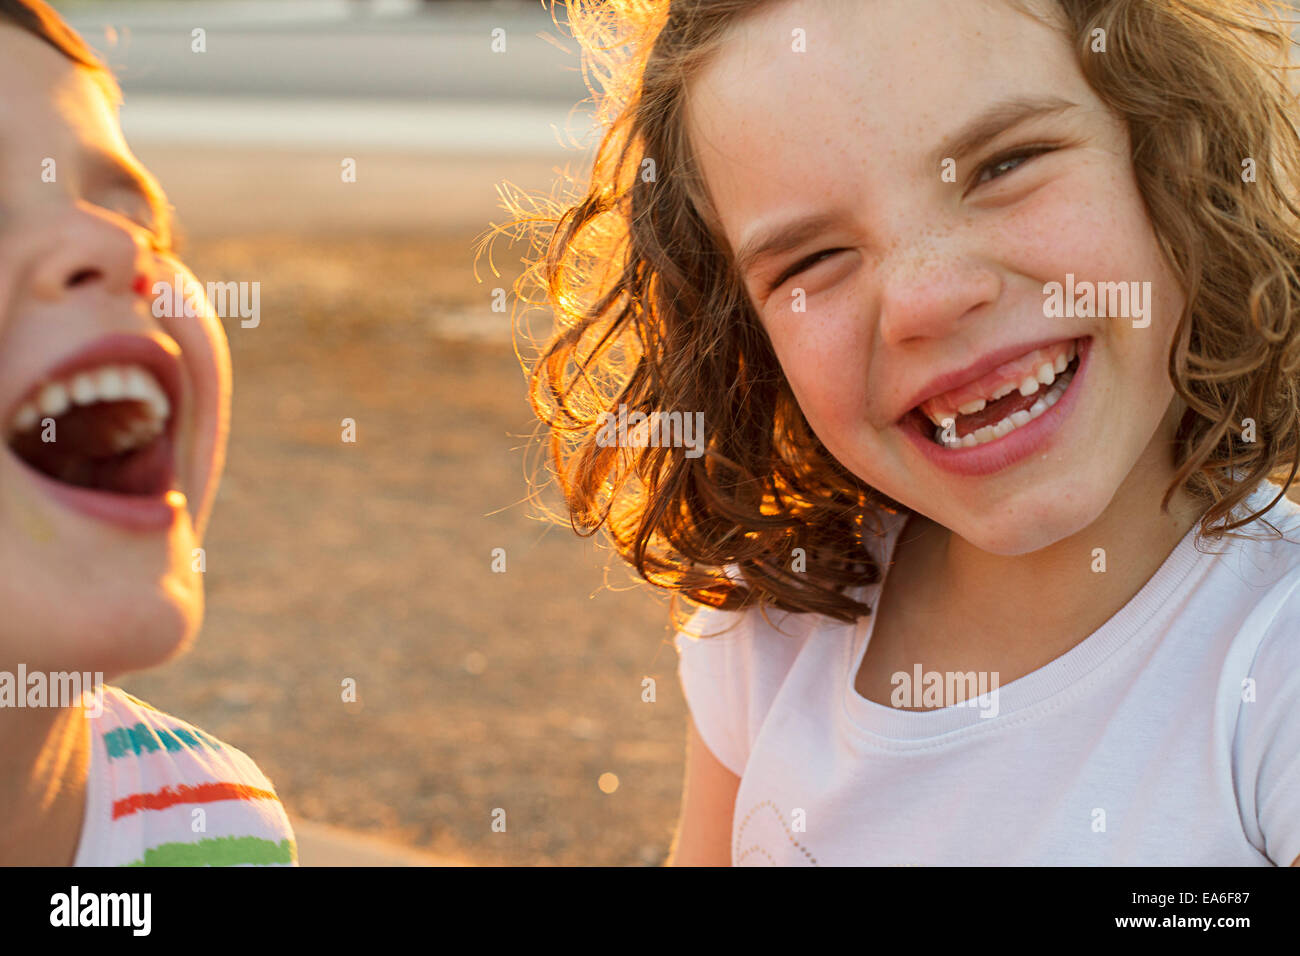 Portrait of two happy children laughing Stock Photo